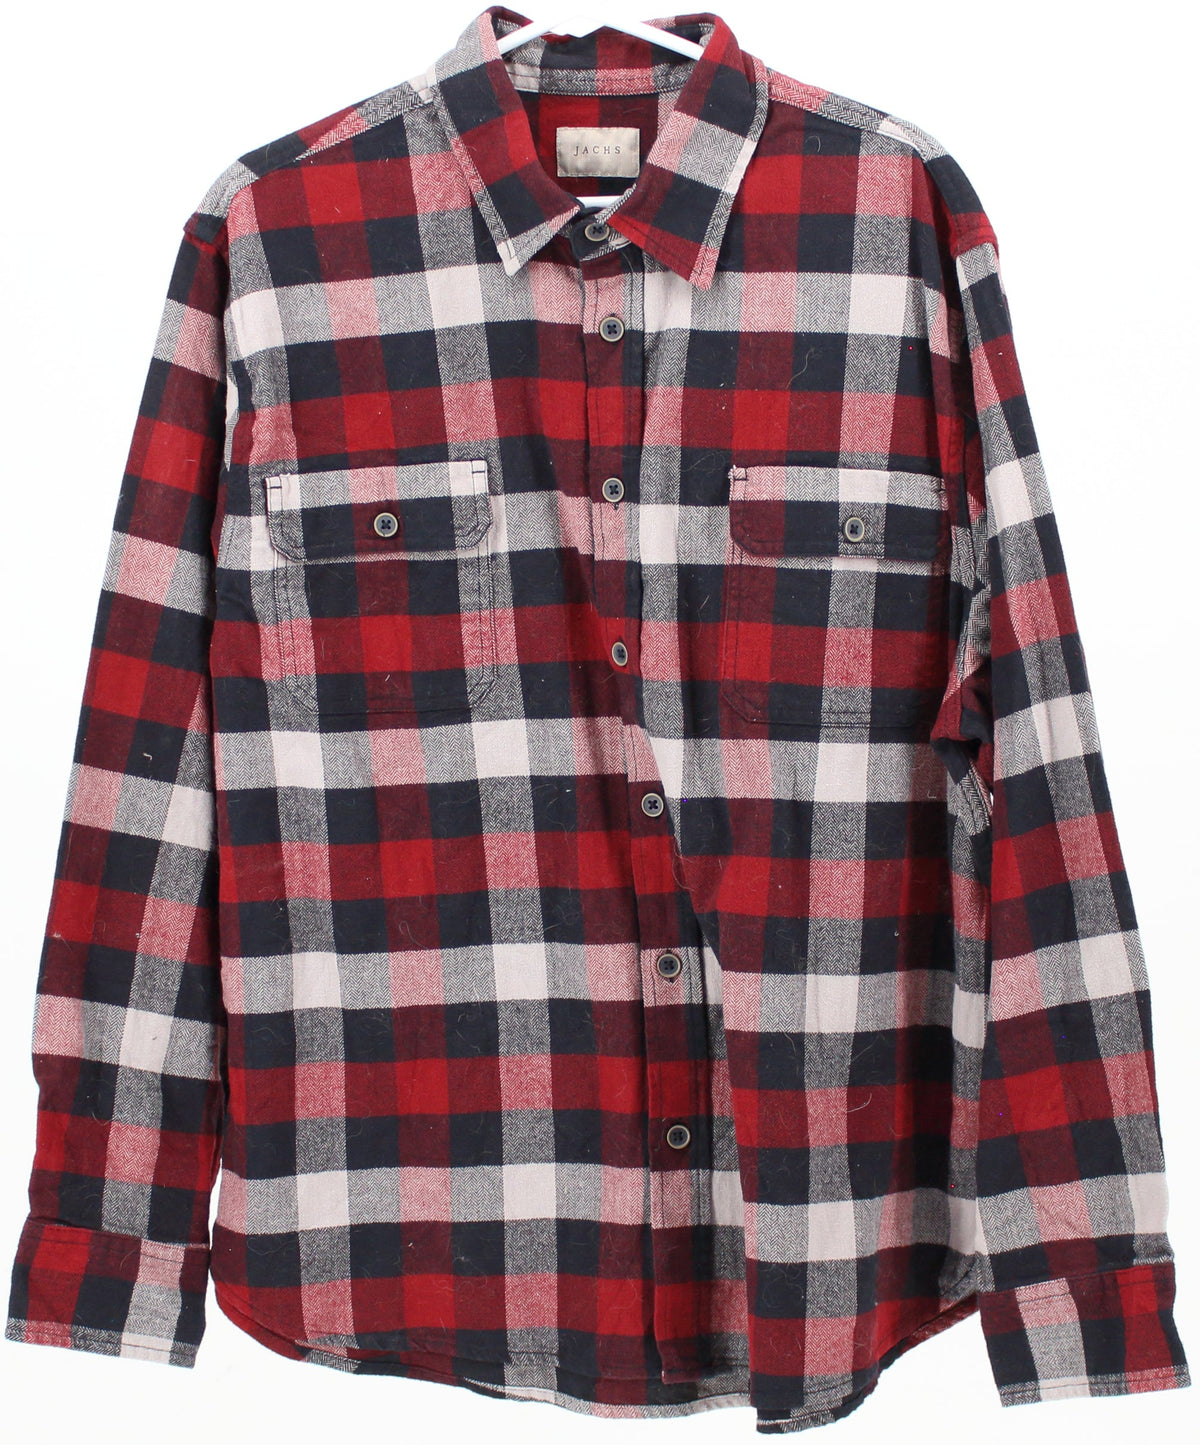 Jachs Red Black and Grey Plaid Flannel Shirt